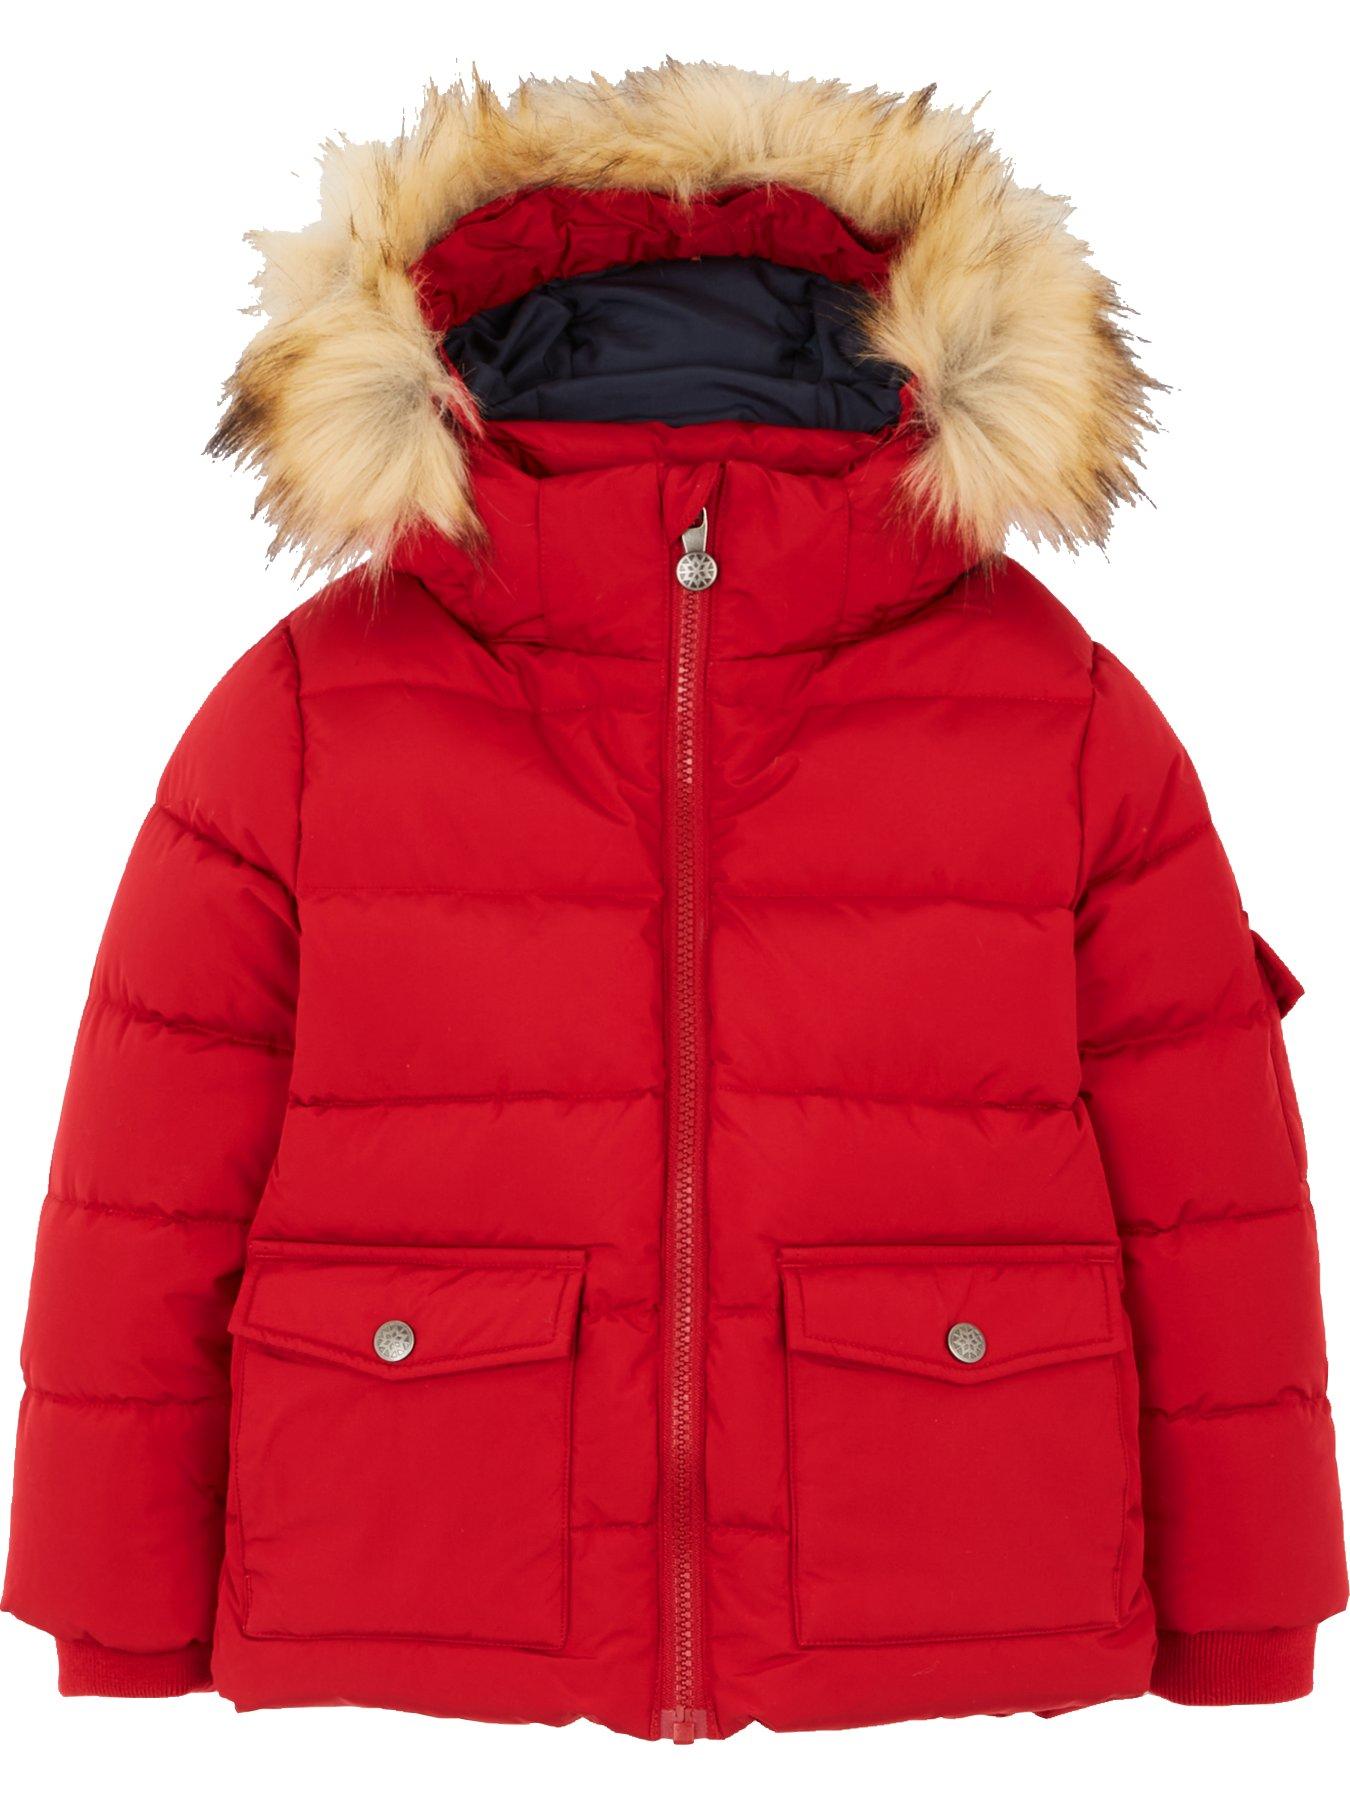  Young Child Unisex Synthetic Fur Coat - Red